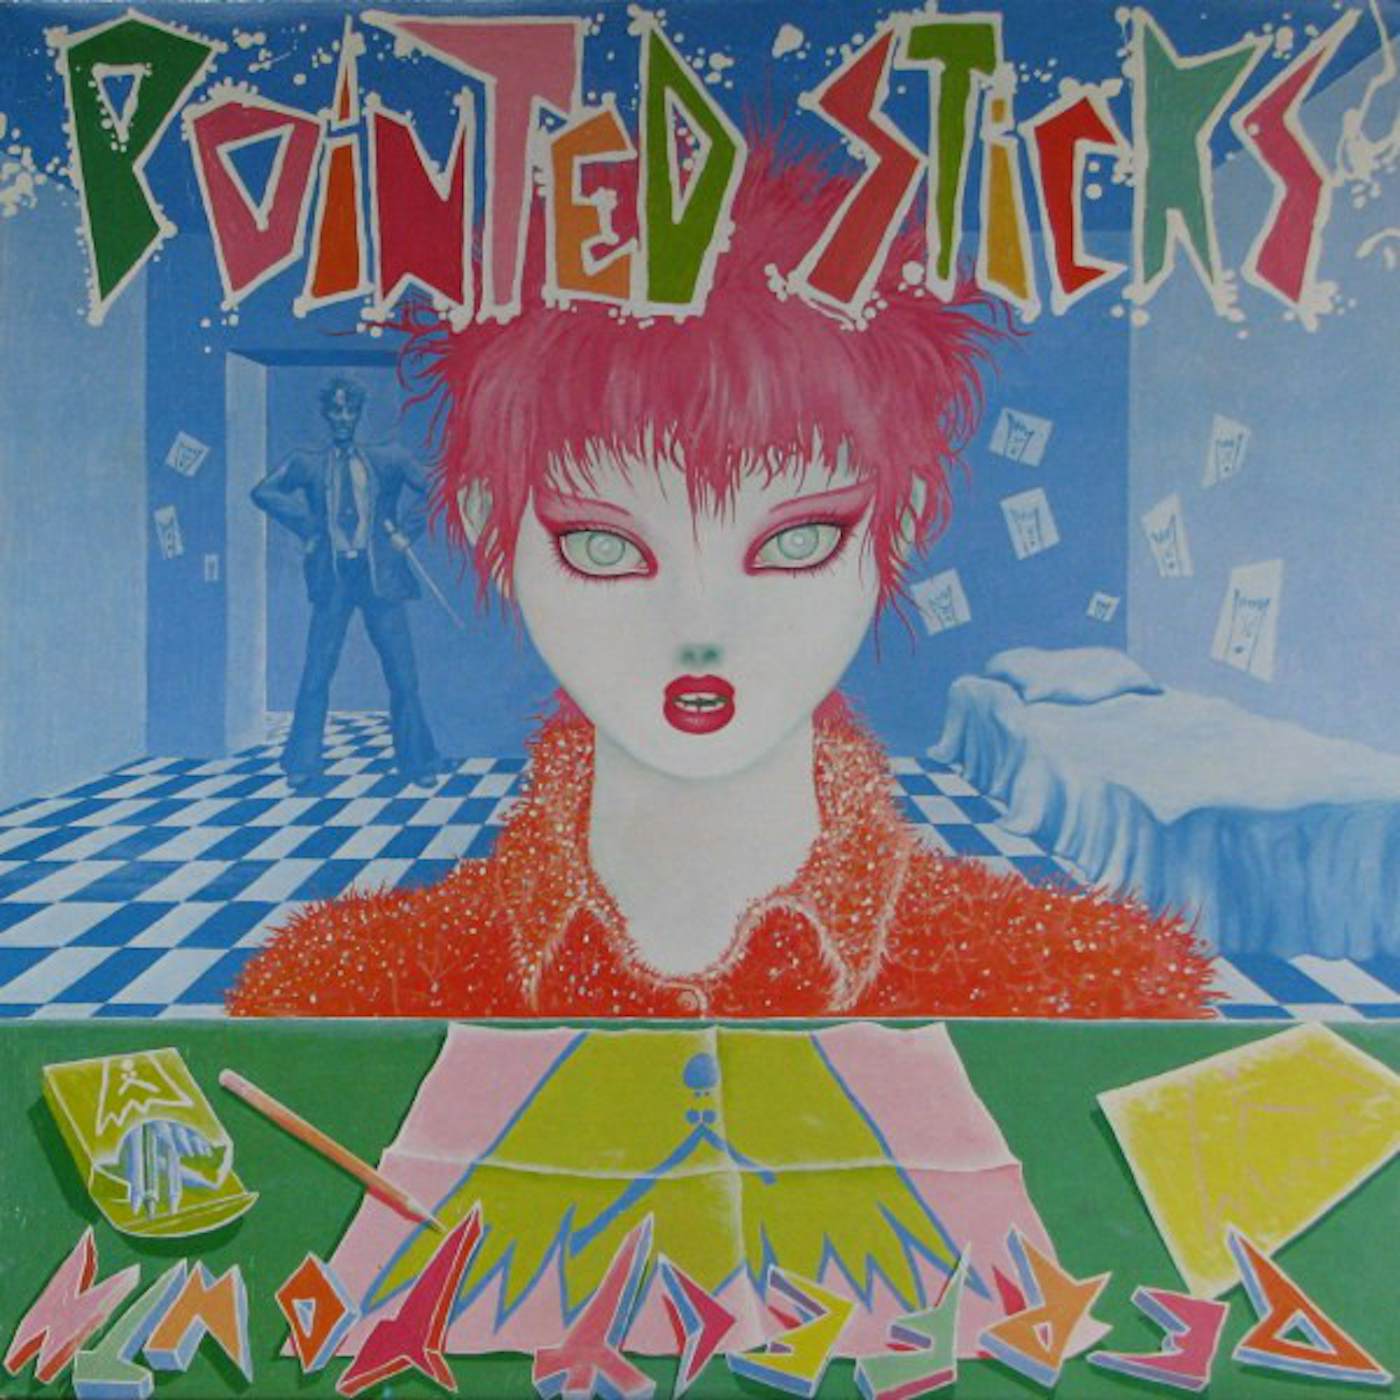 Pointed Sticks Perfect Youth Vinyl Record